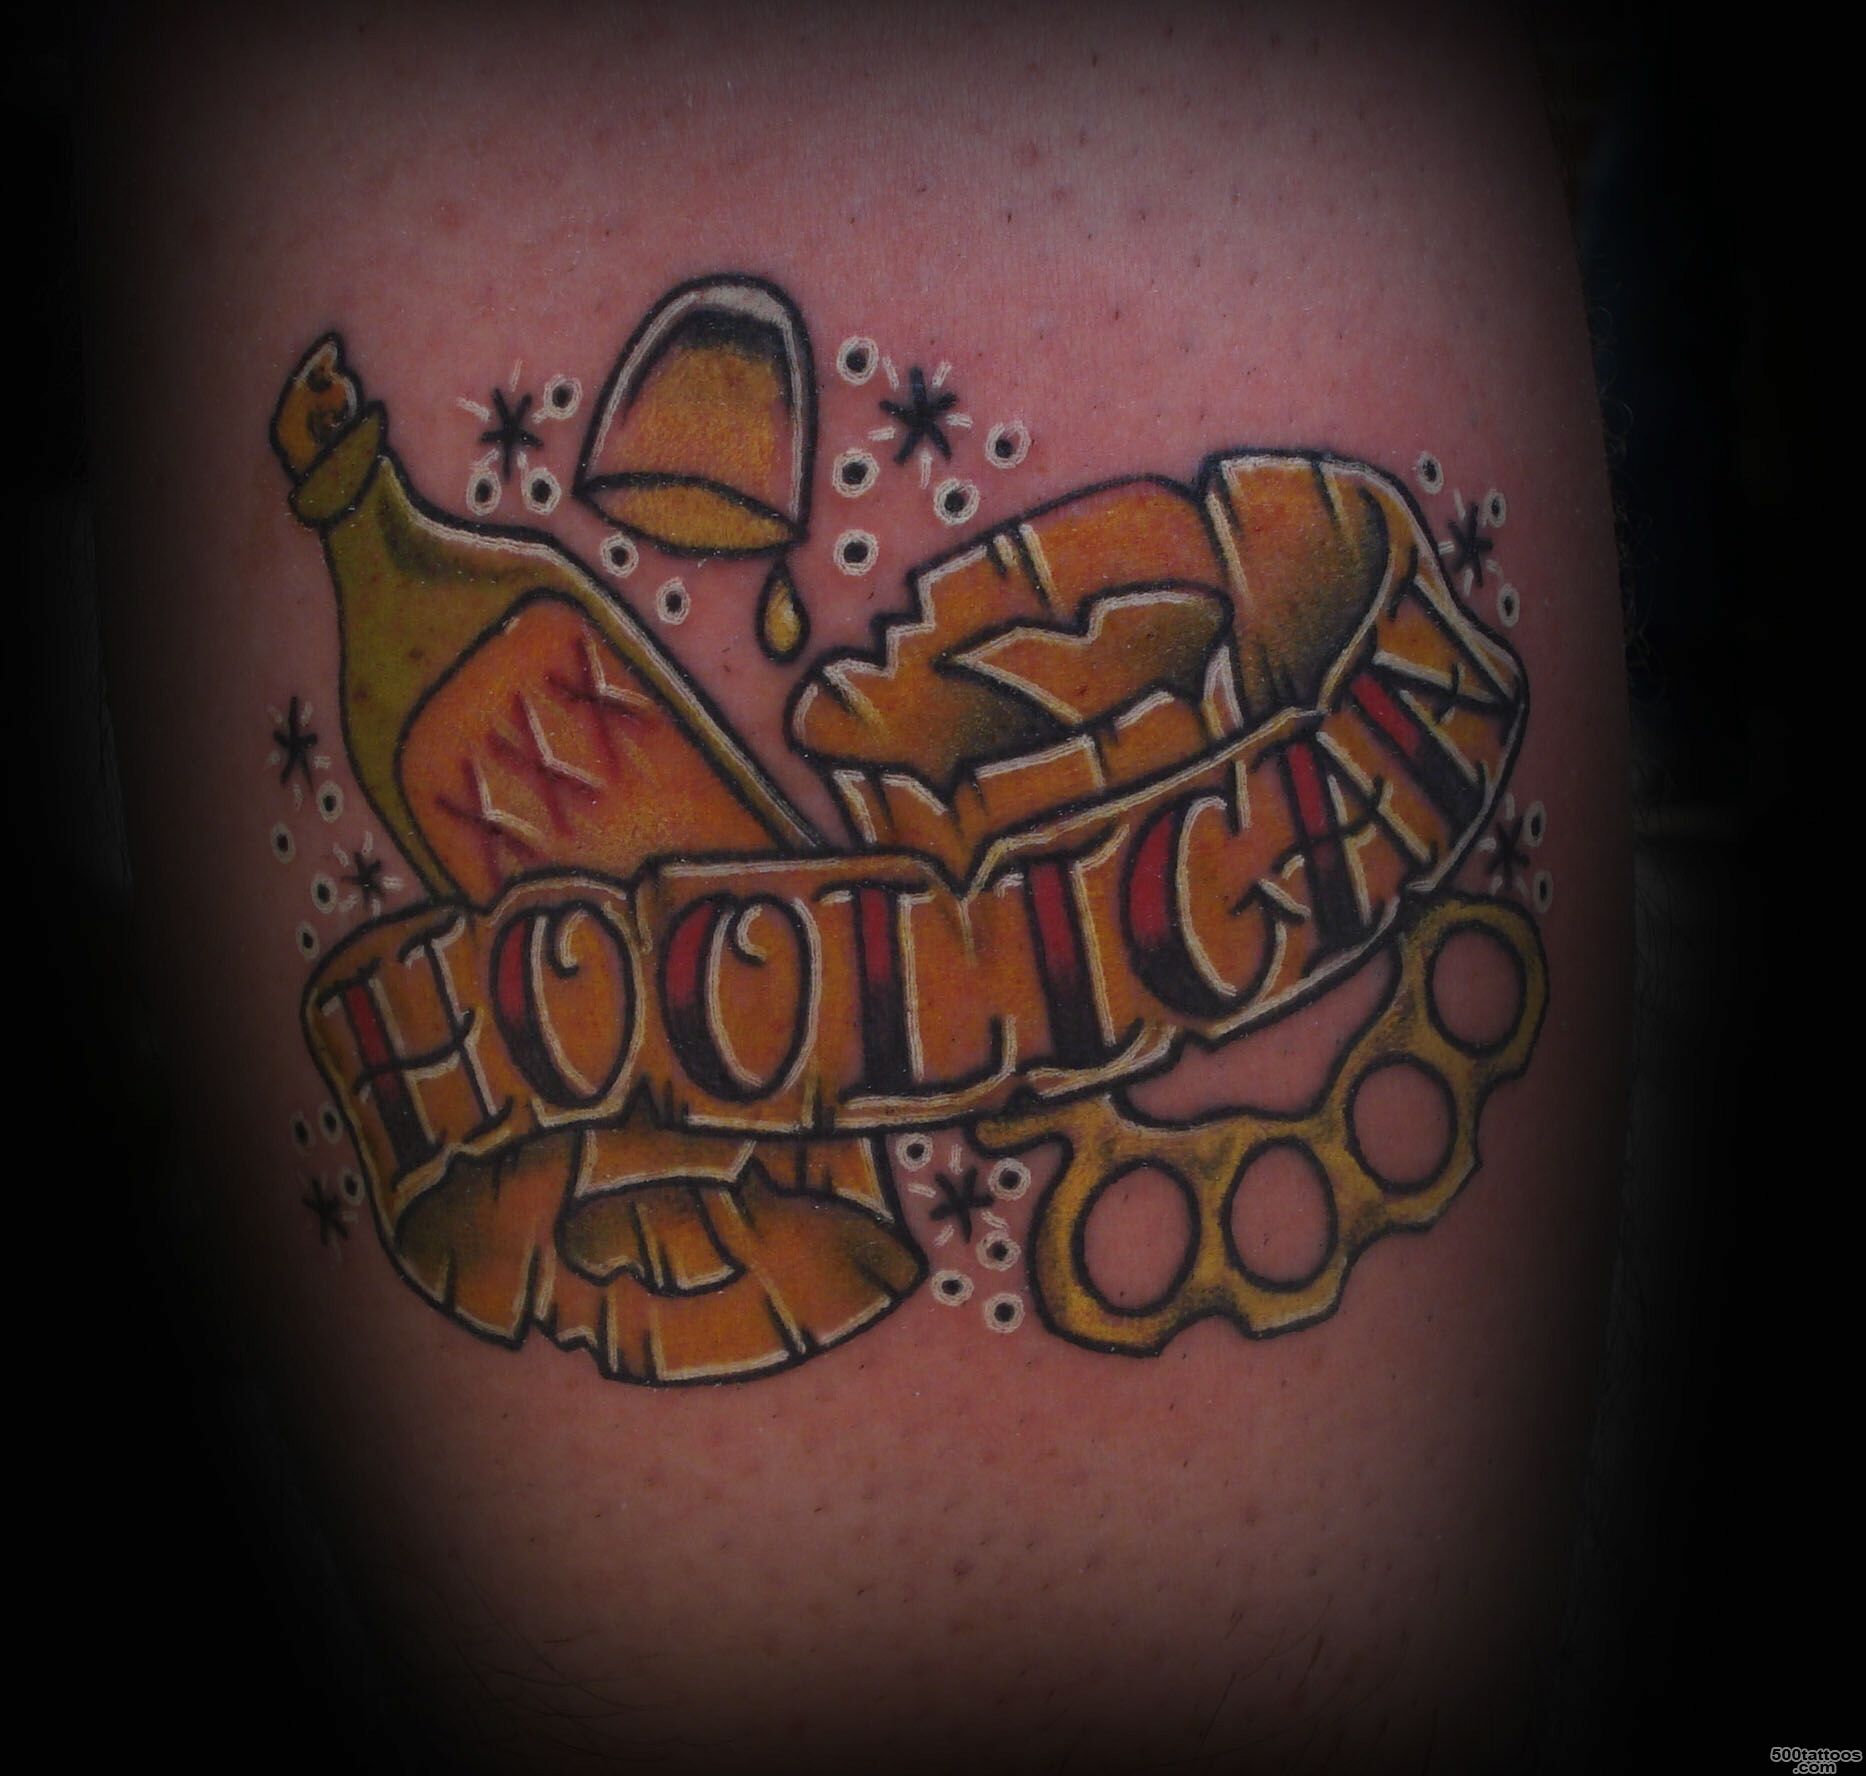 Pin Hooligan Tattoos Page 2 Picture on Pinterest_23.JPG